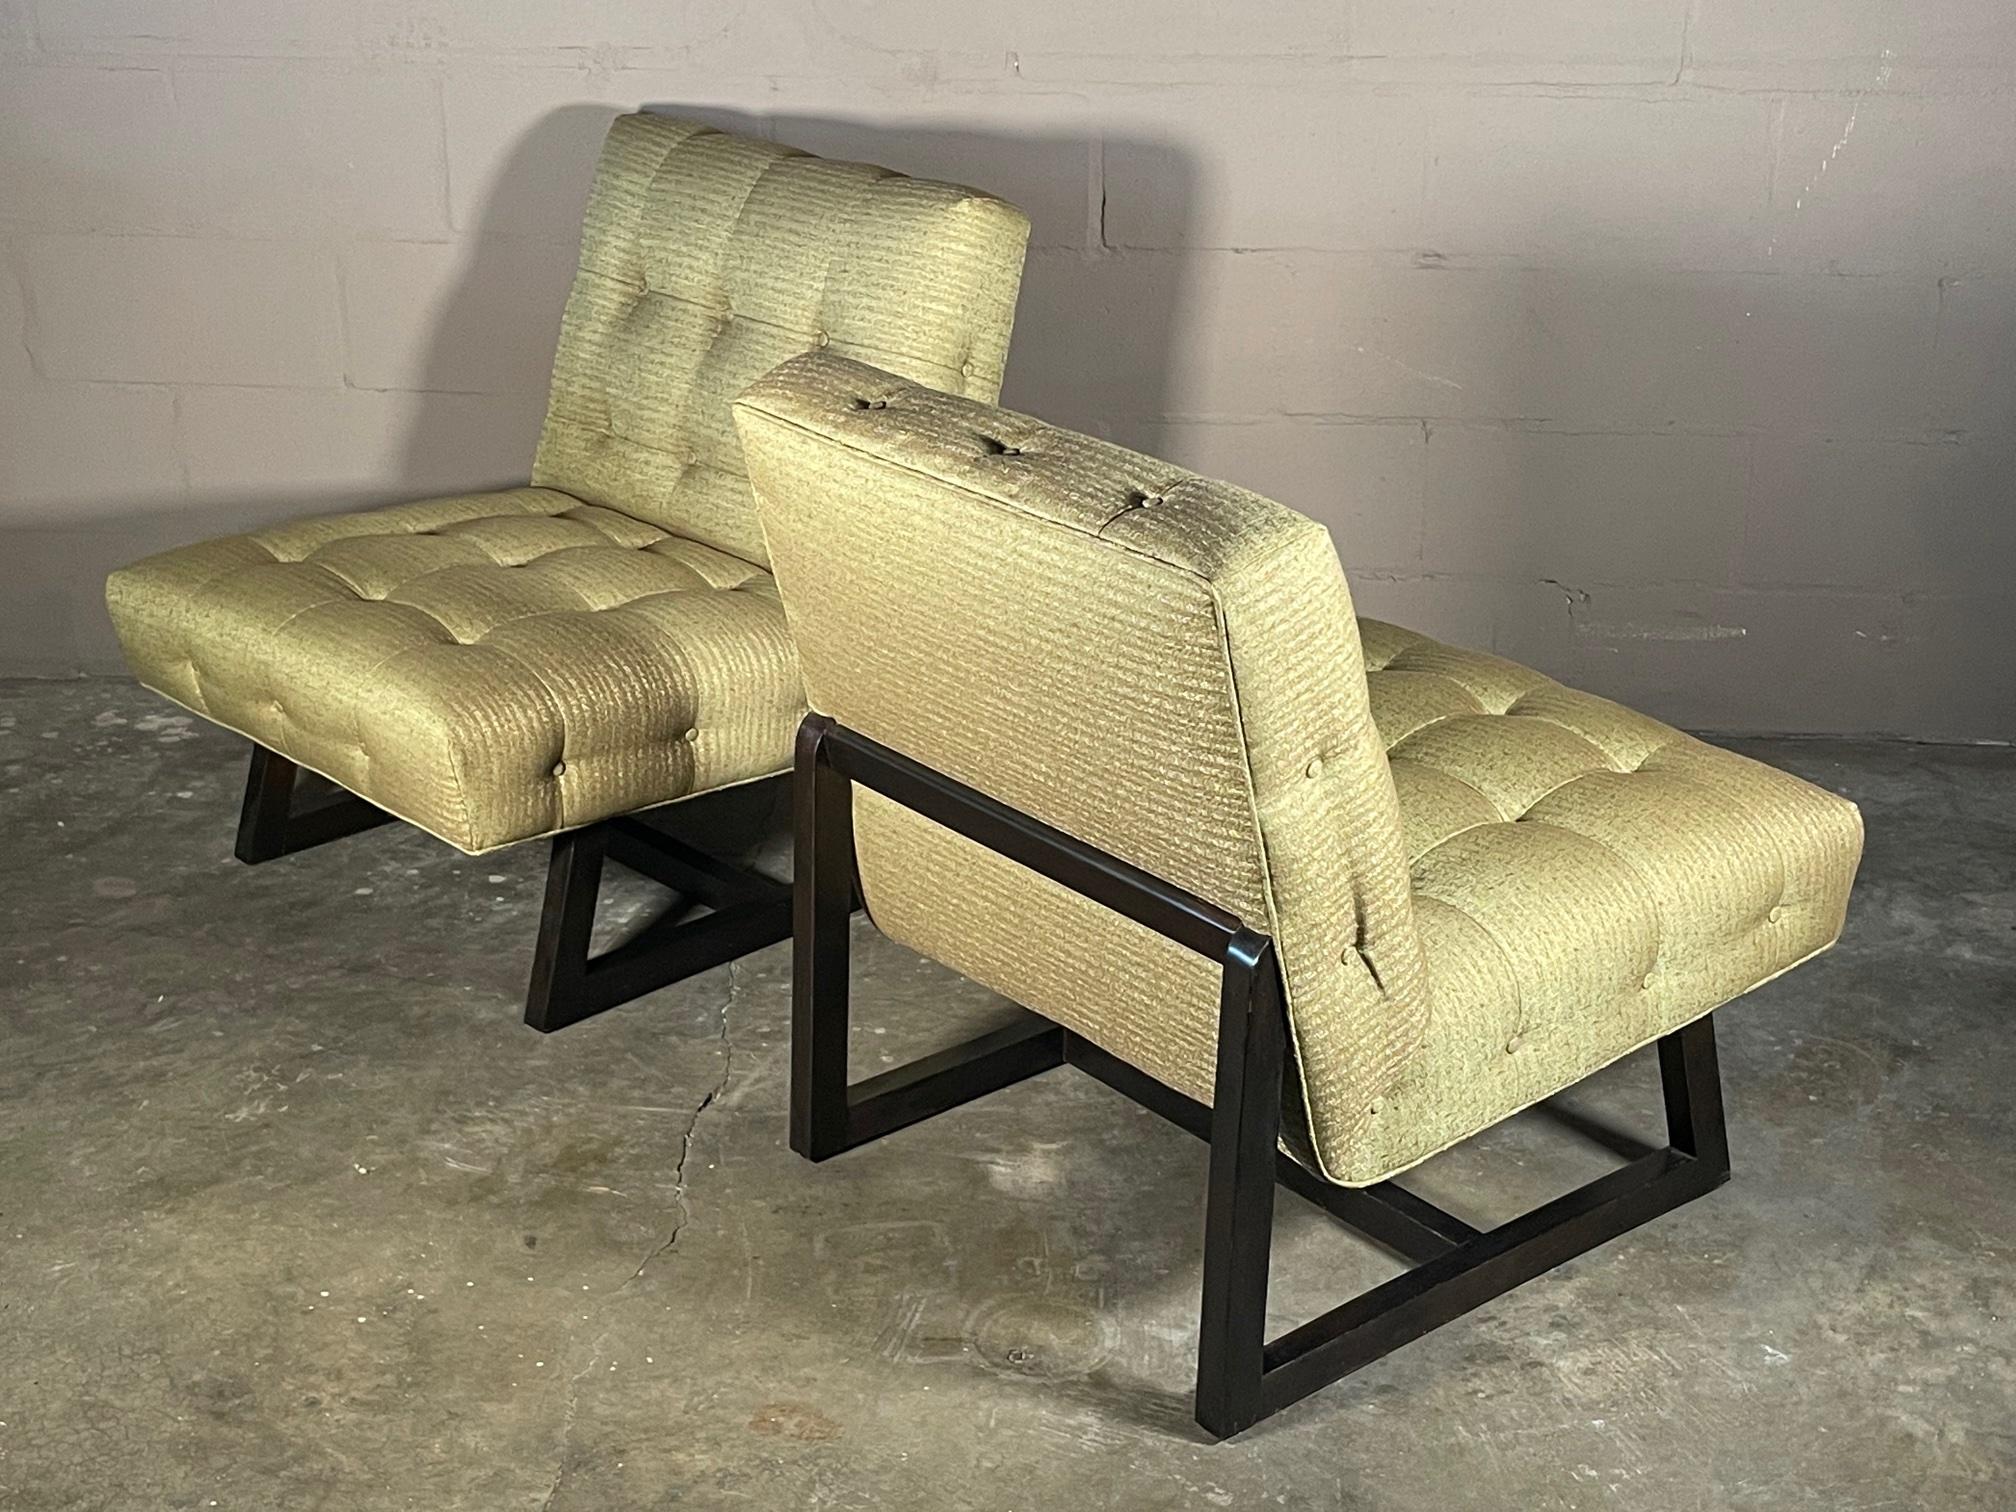 A great pair of slipper chairs ca' early 1950's. Dark brown frames, reupholstered in period green/brown fabric.